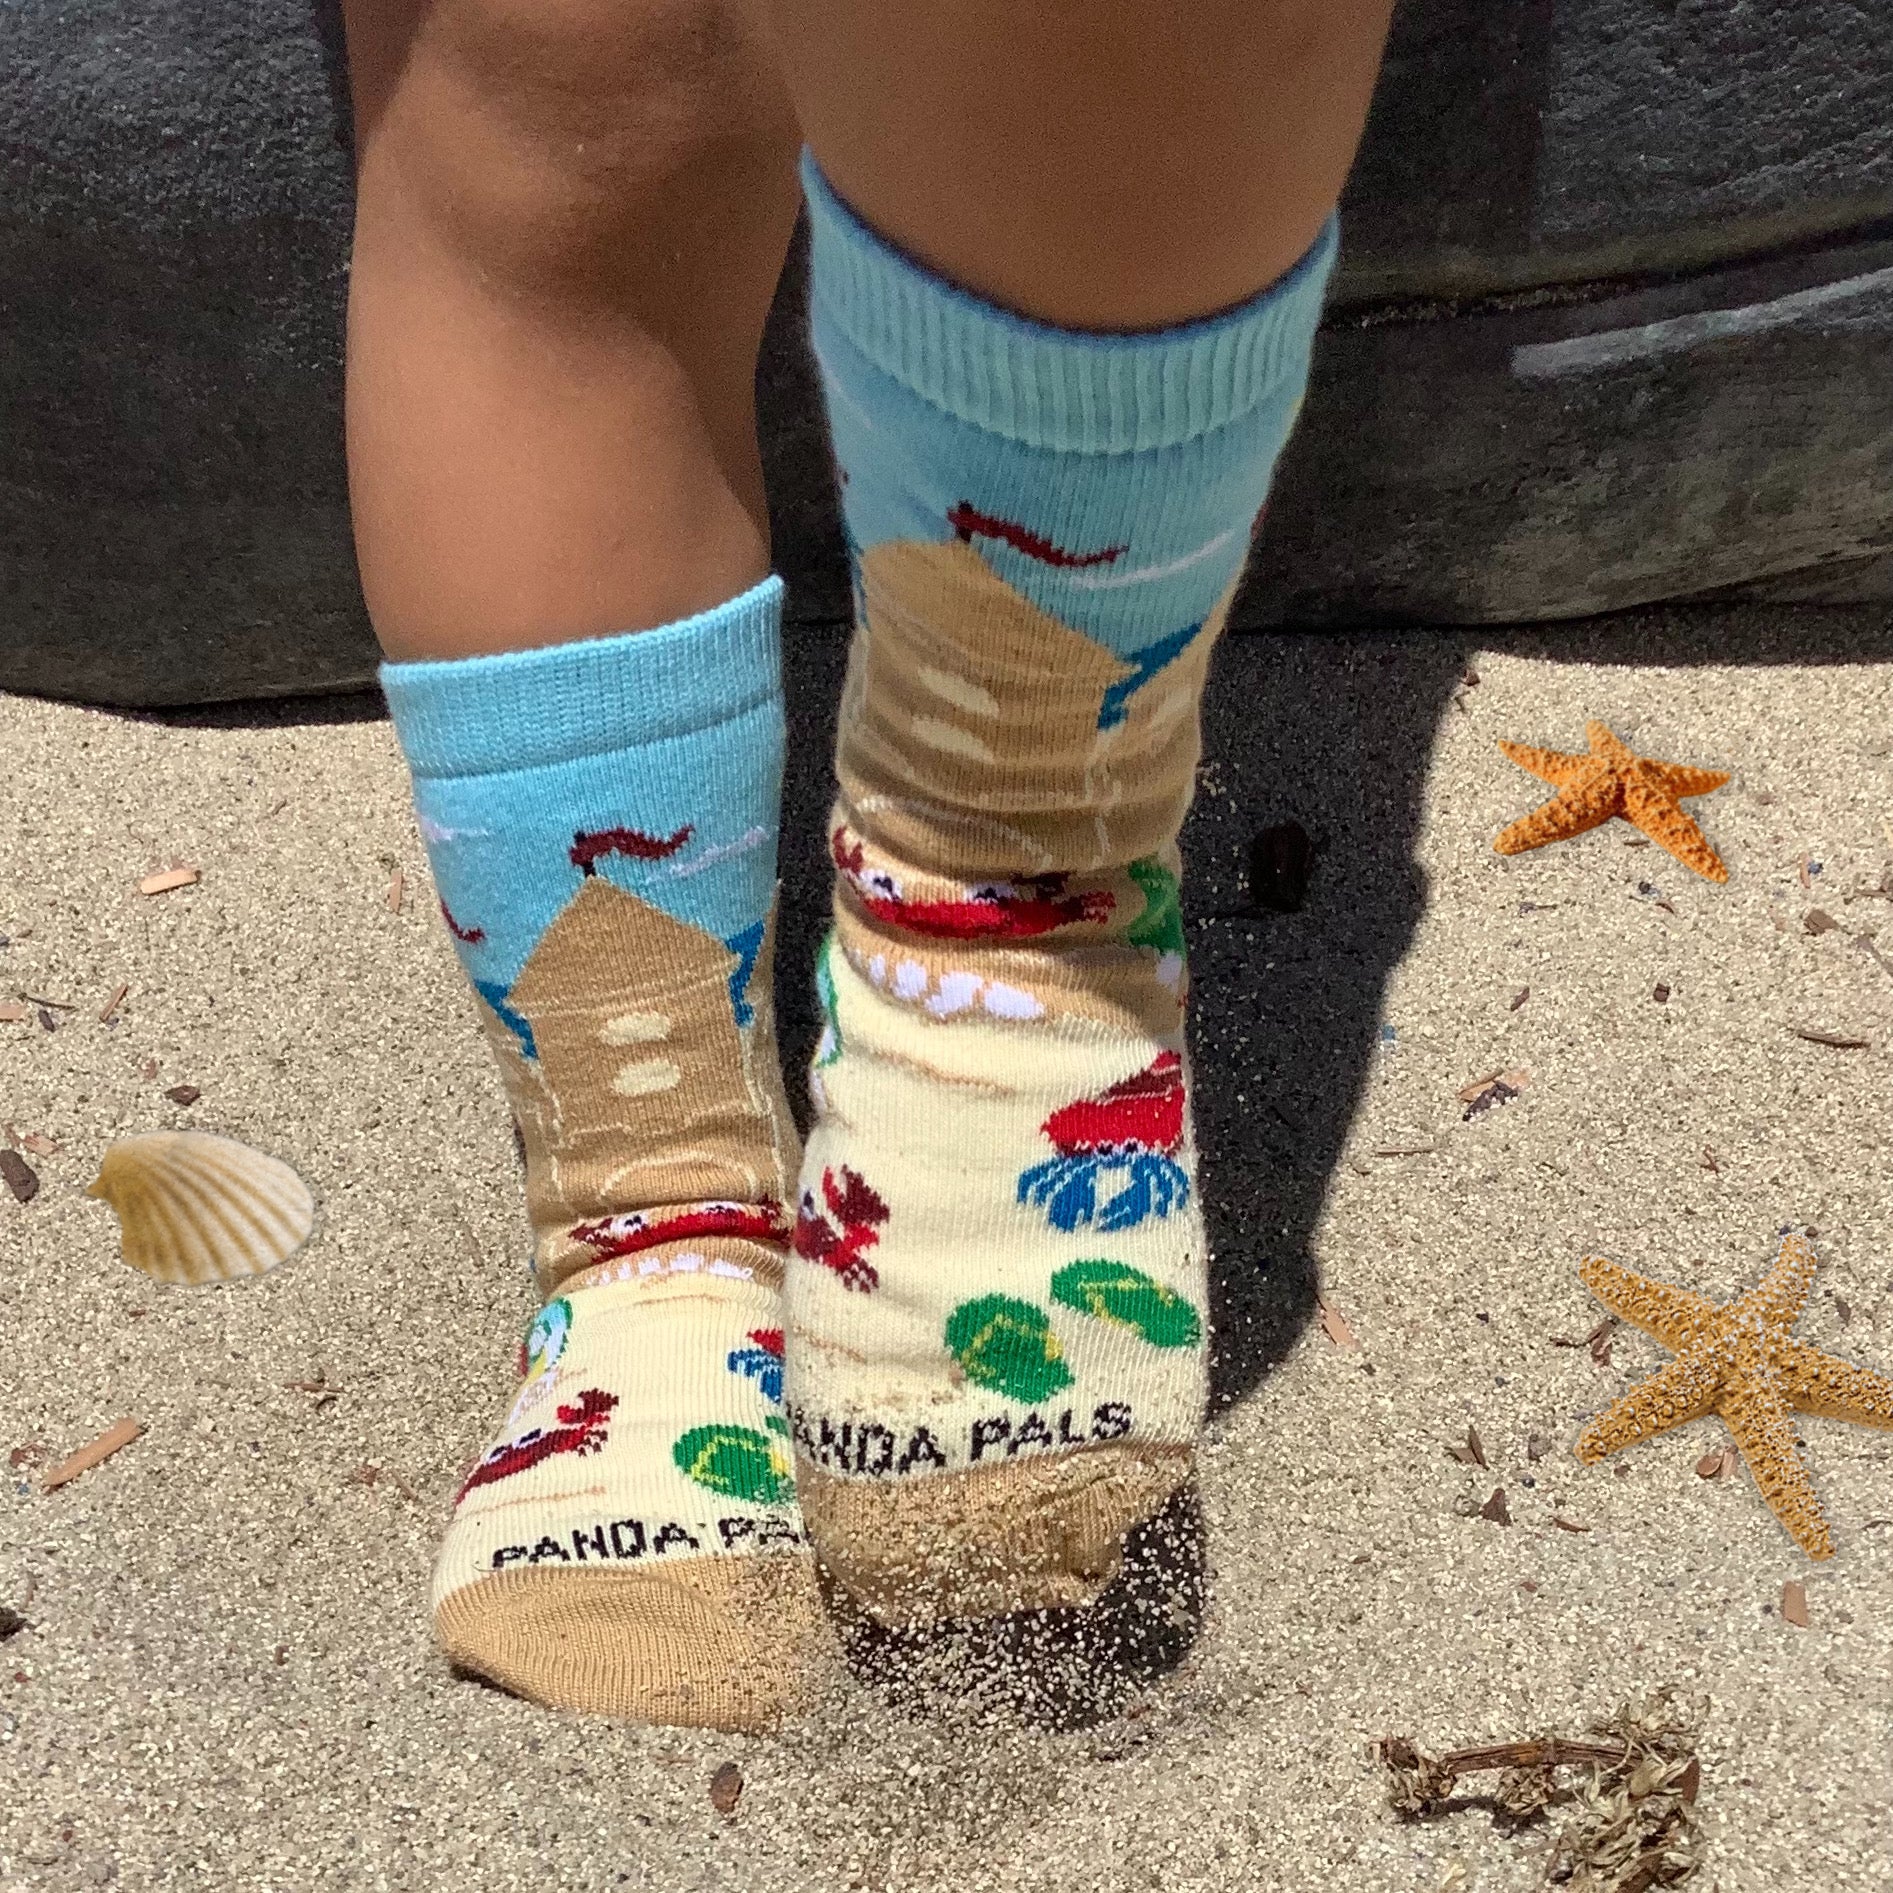 Sand Castle Socks (Ages 3-7) from the Sock Panda